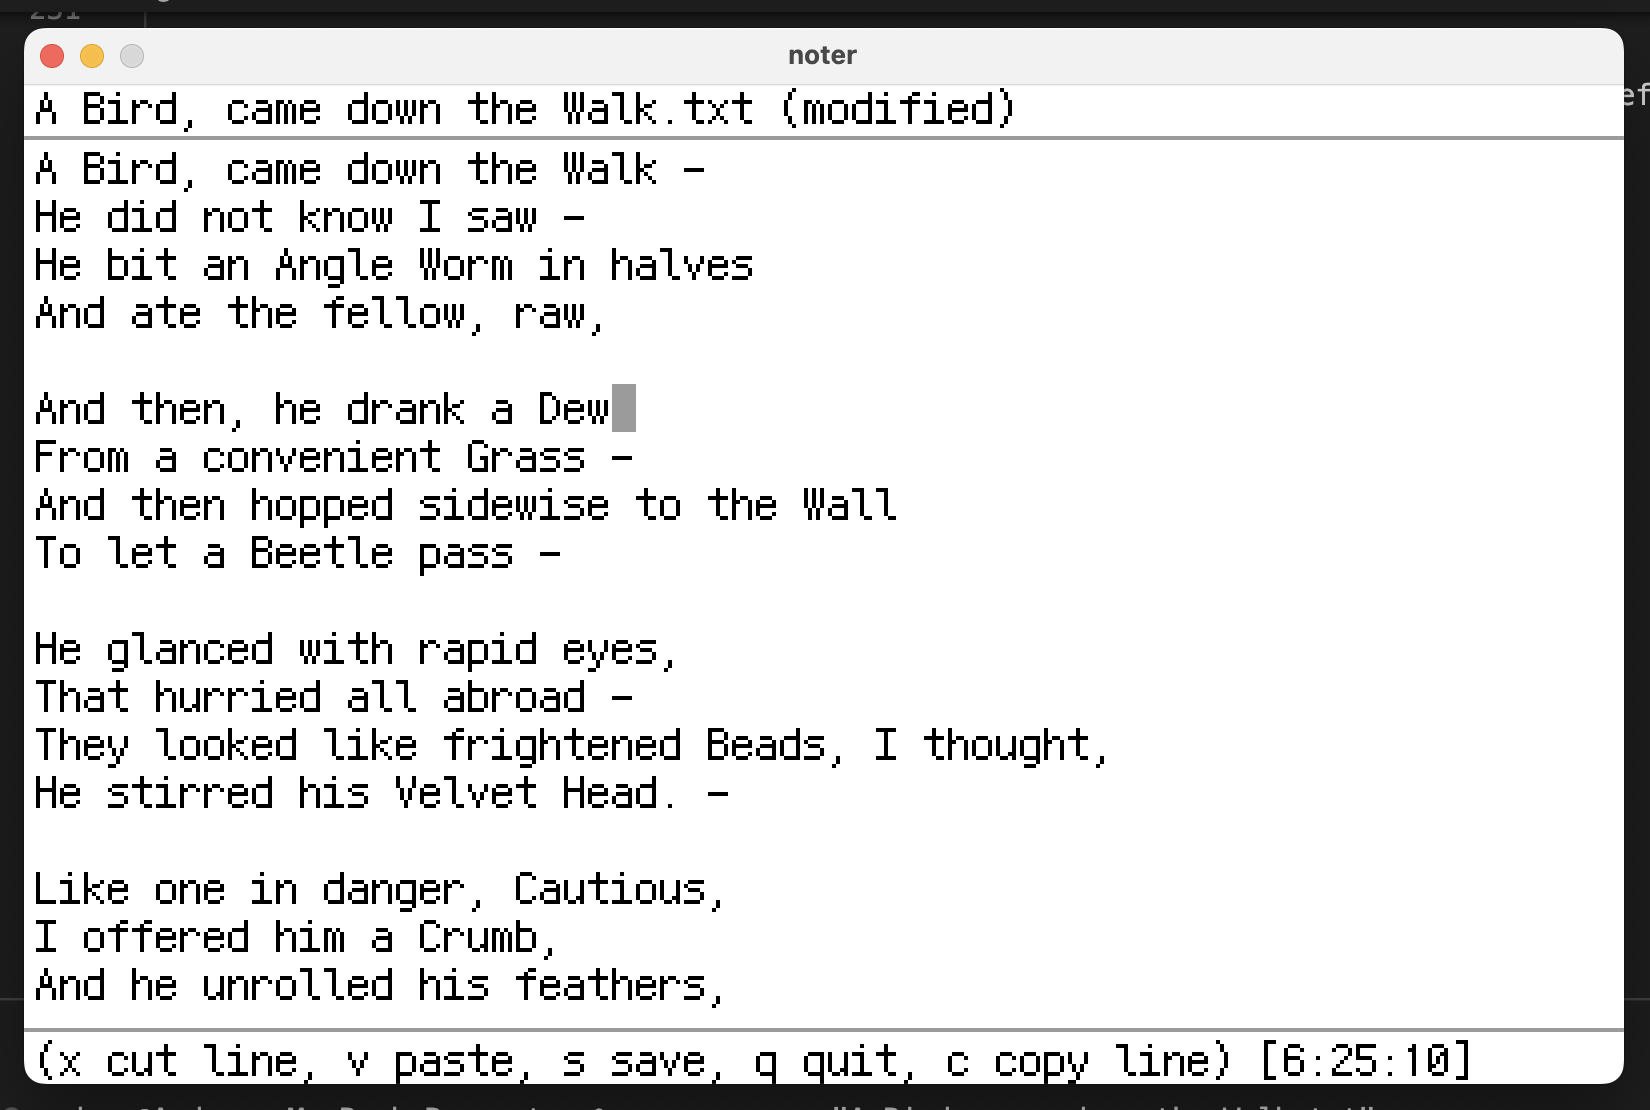 A screenshot of noter – which looks like nano – an Emily Dickinson poem is being edited.